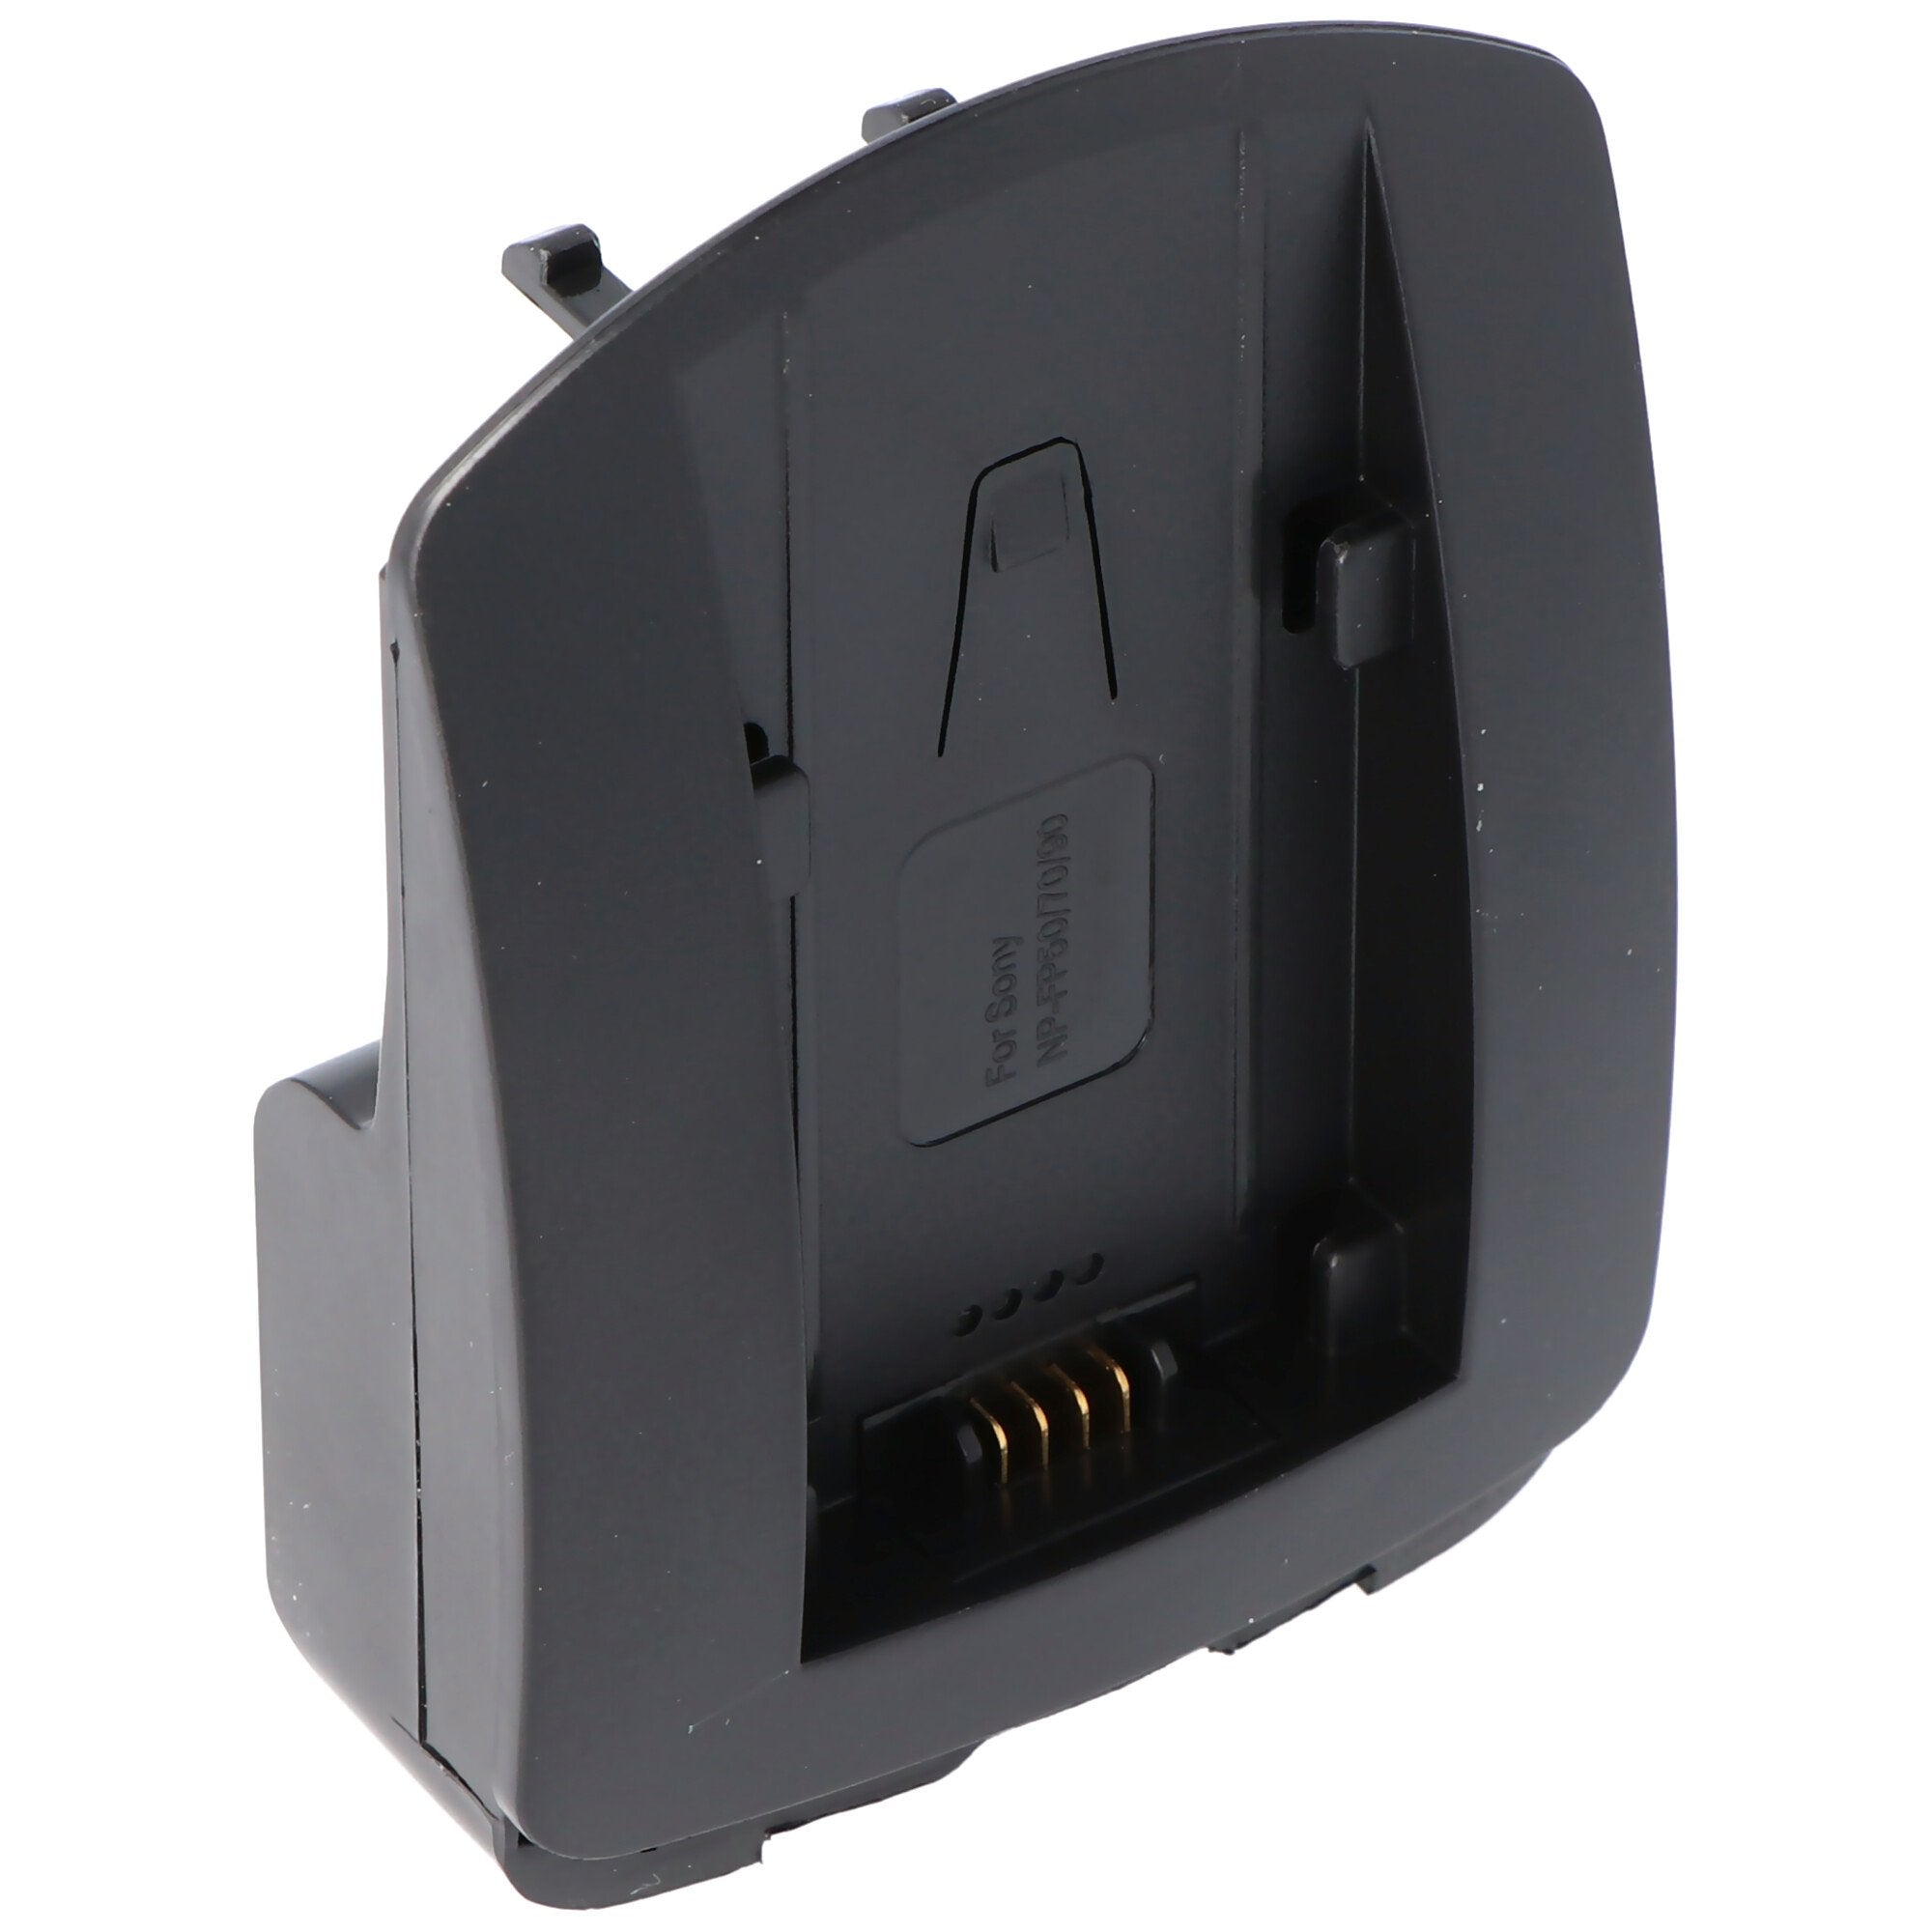 Charging cradle for Sony NP-FH30, NP-FH40, NP-FH50, NP-FH60, NP-FH70